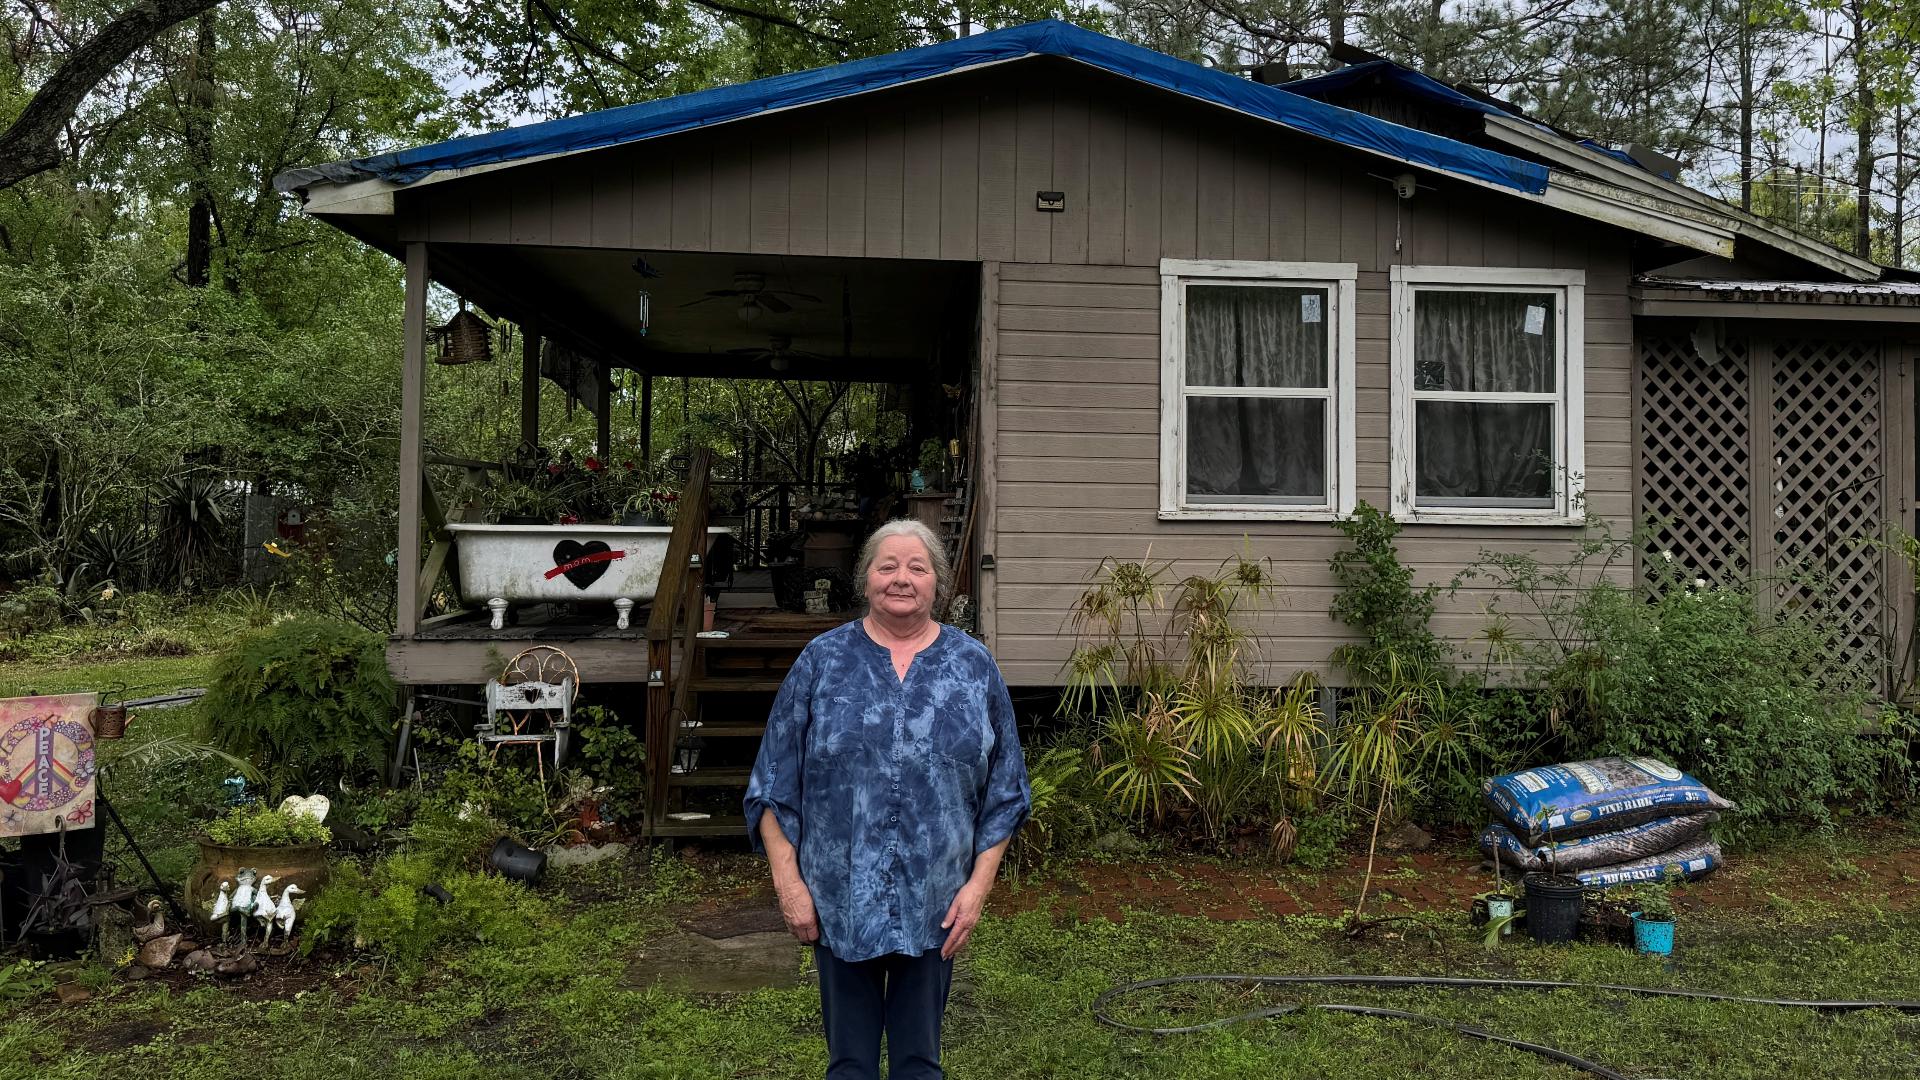 Rebuild Florida was created to help some of the most vulnerable Floridians repair or replace their homes damaged by Hurricane Irma. Some of them are still waiting.